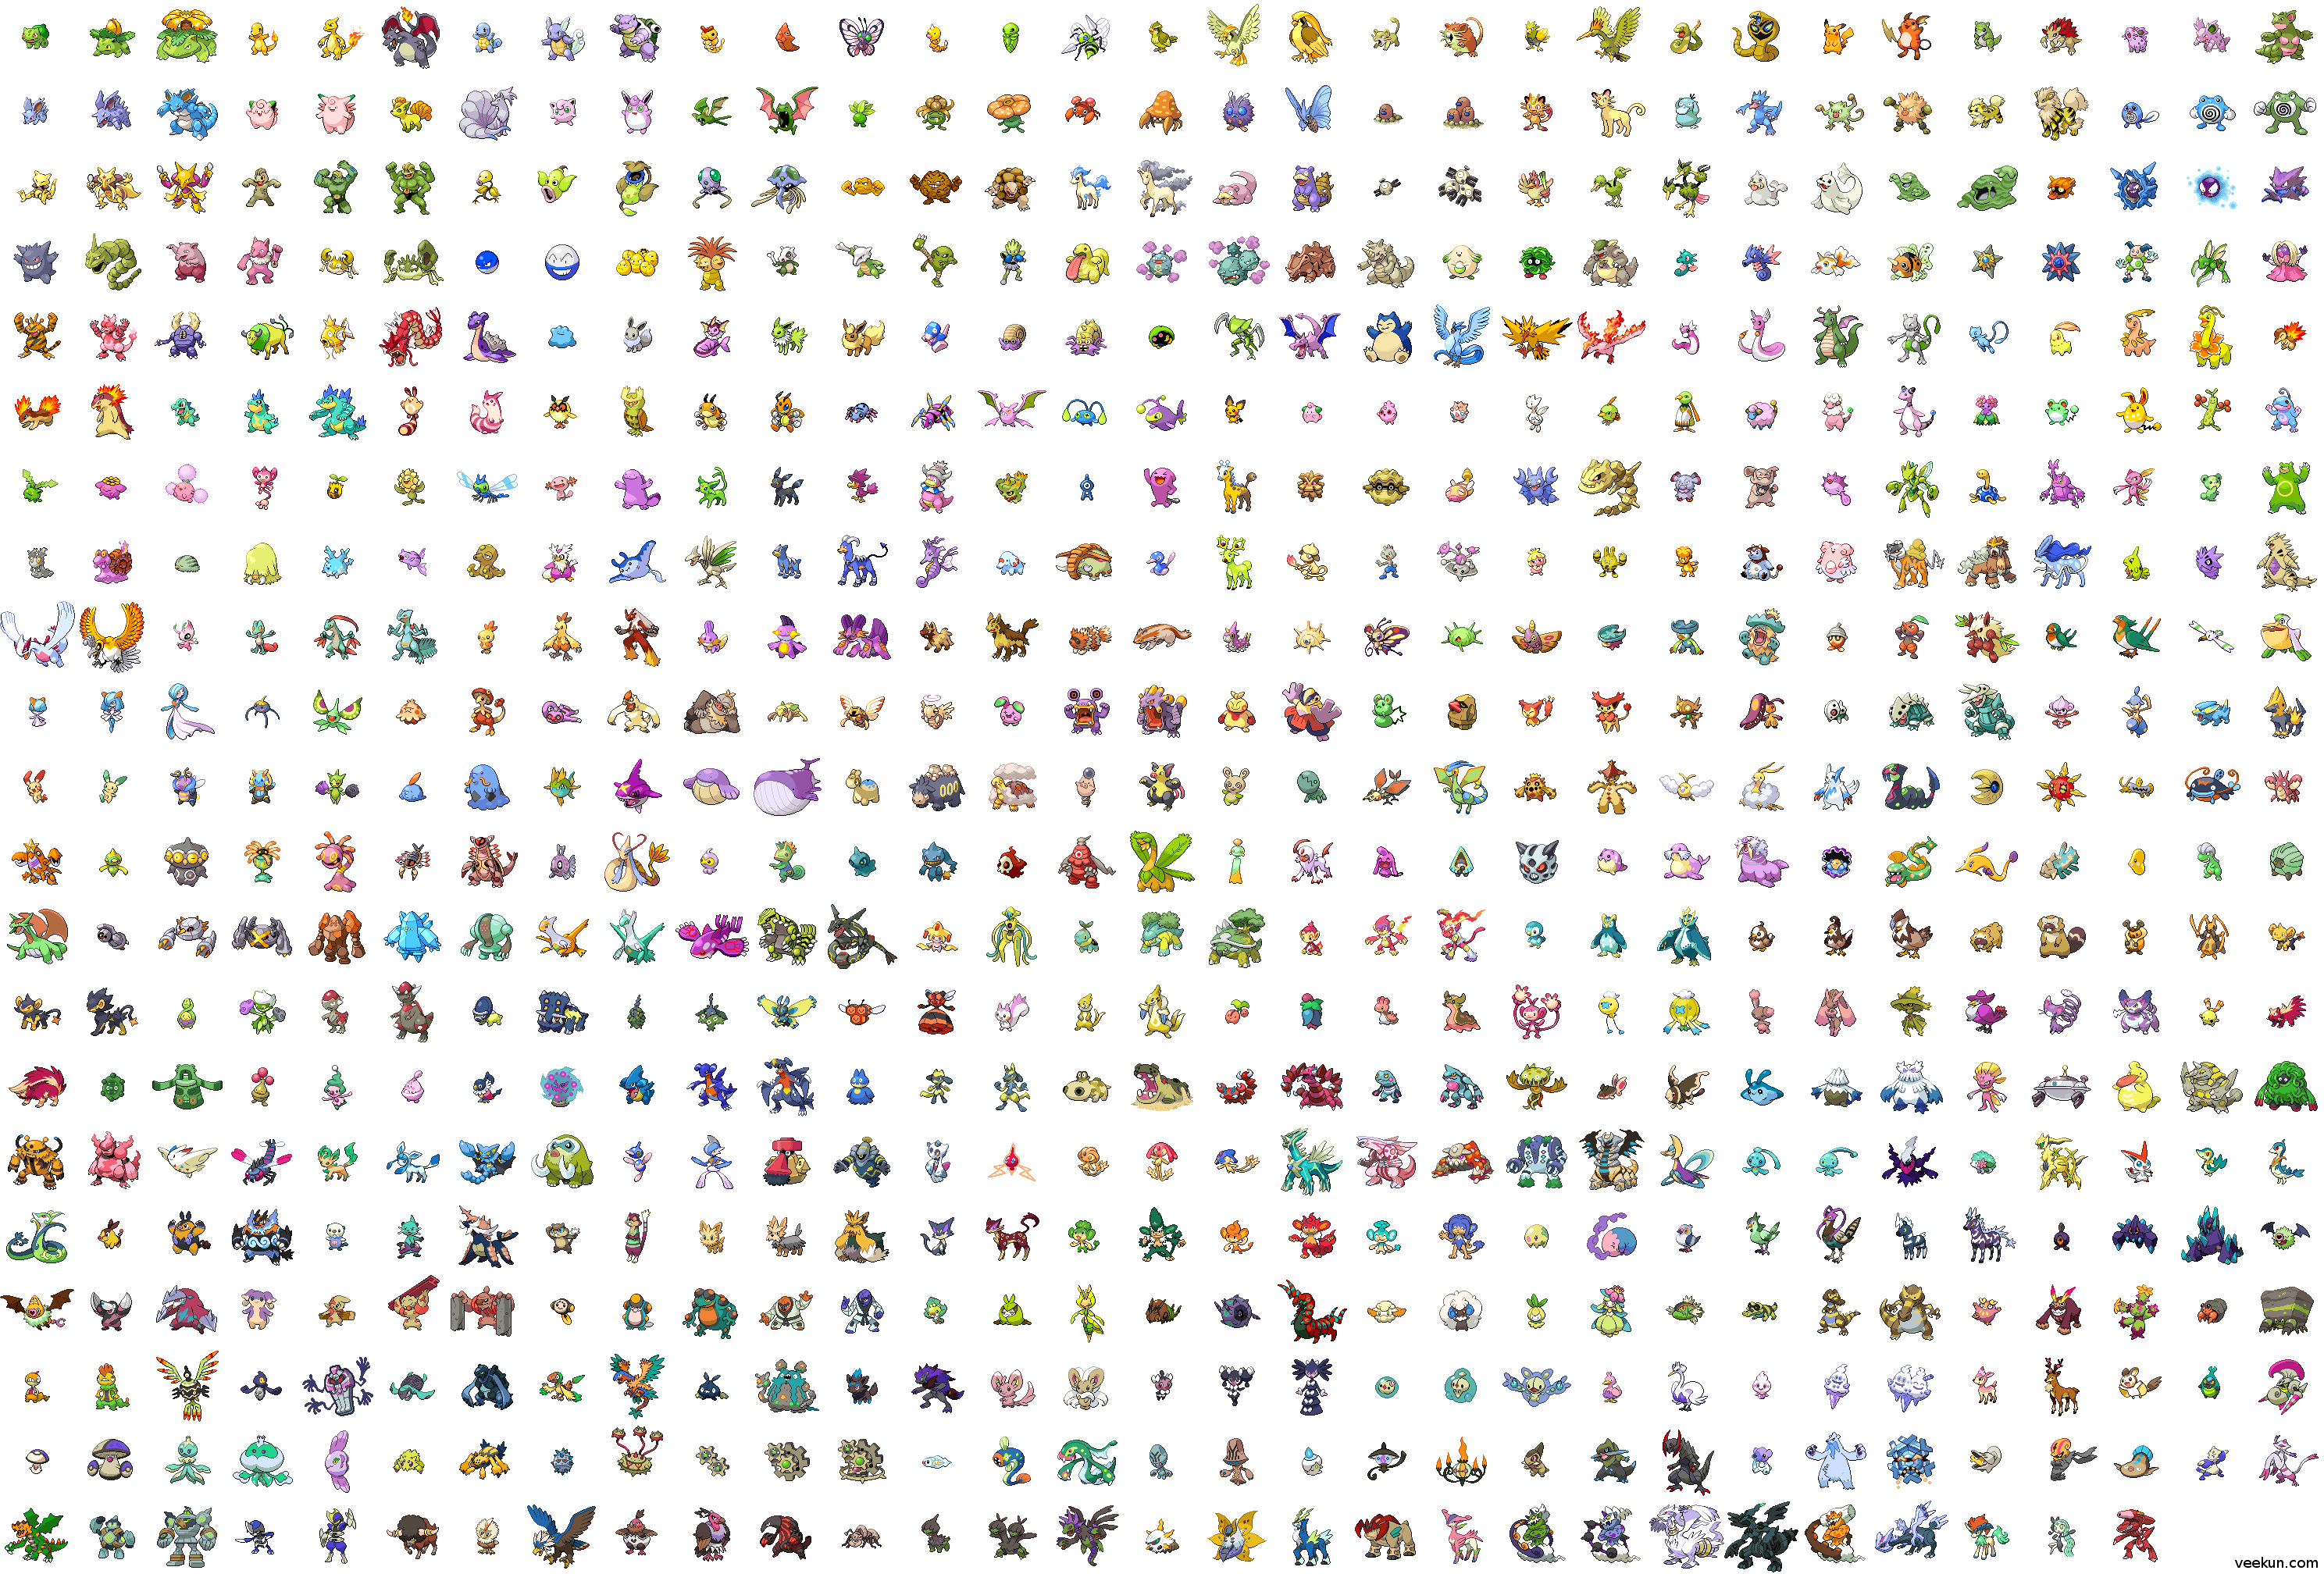 all_shiny_pokemon_by_supersimpsons-d4f2lua.png